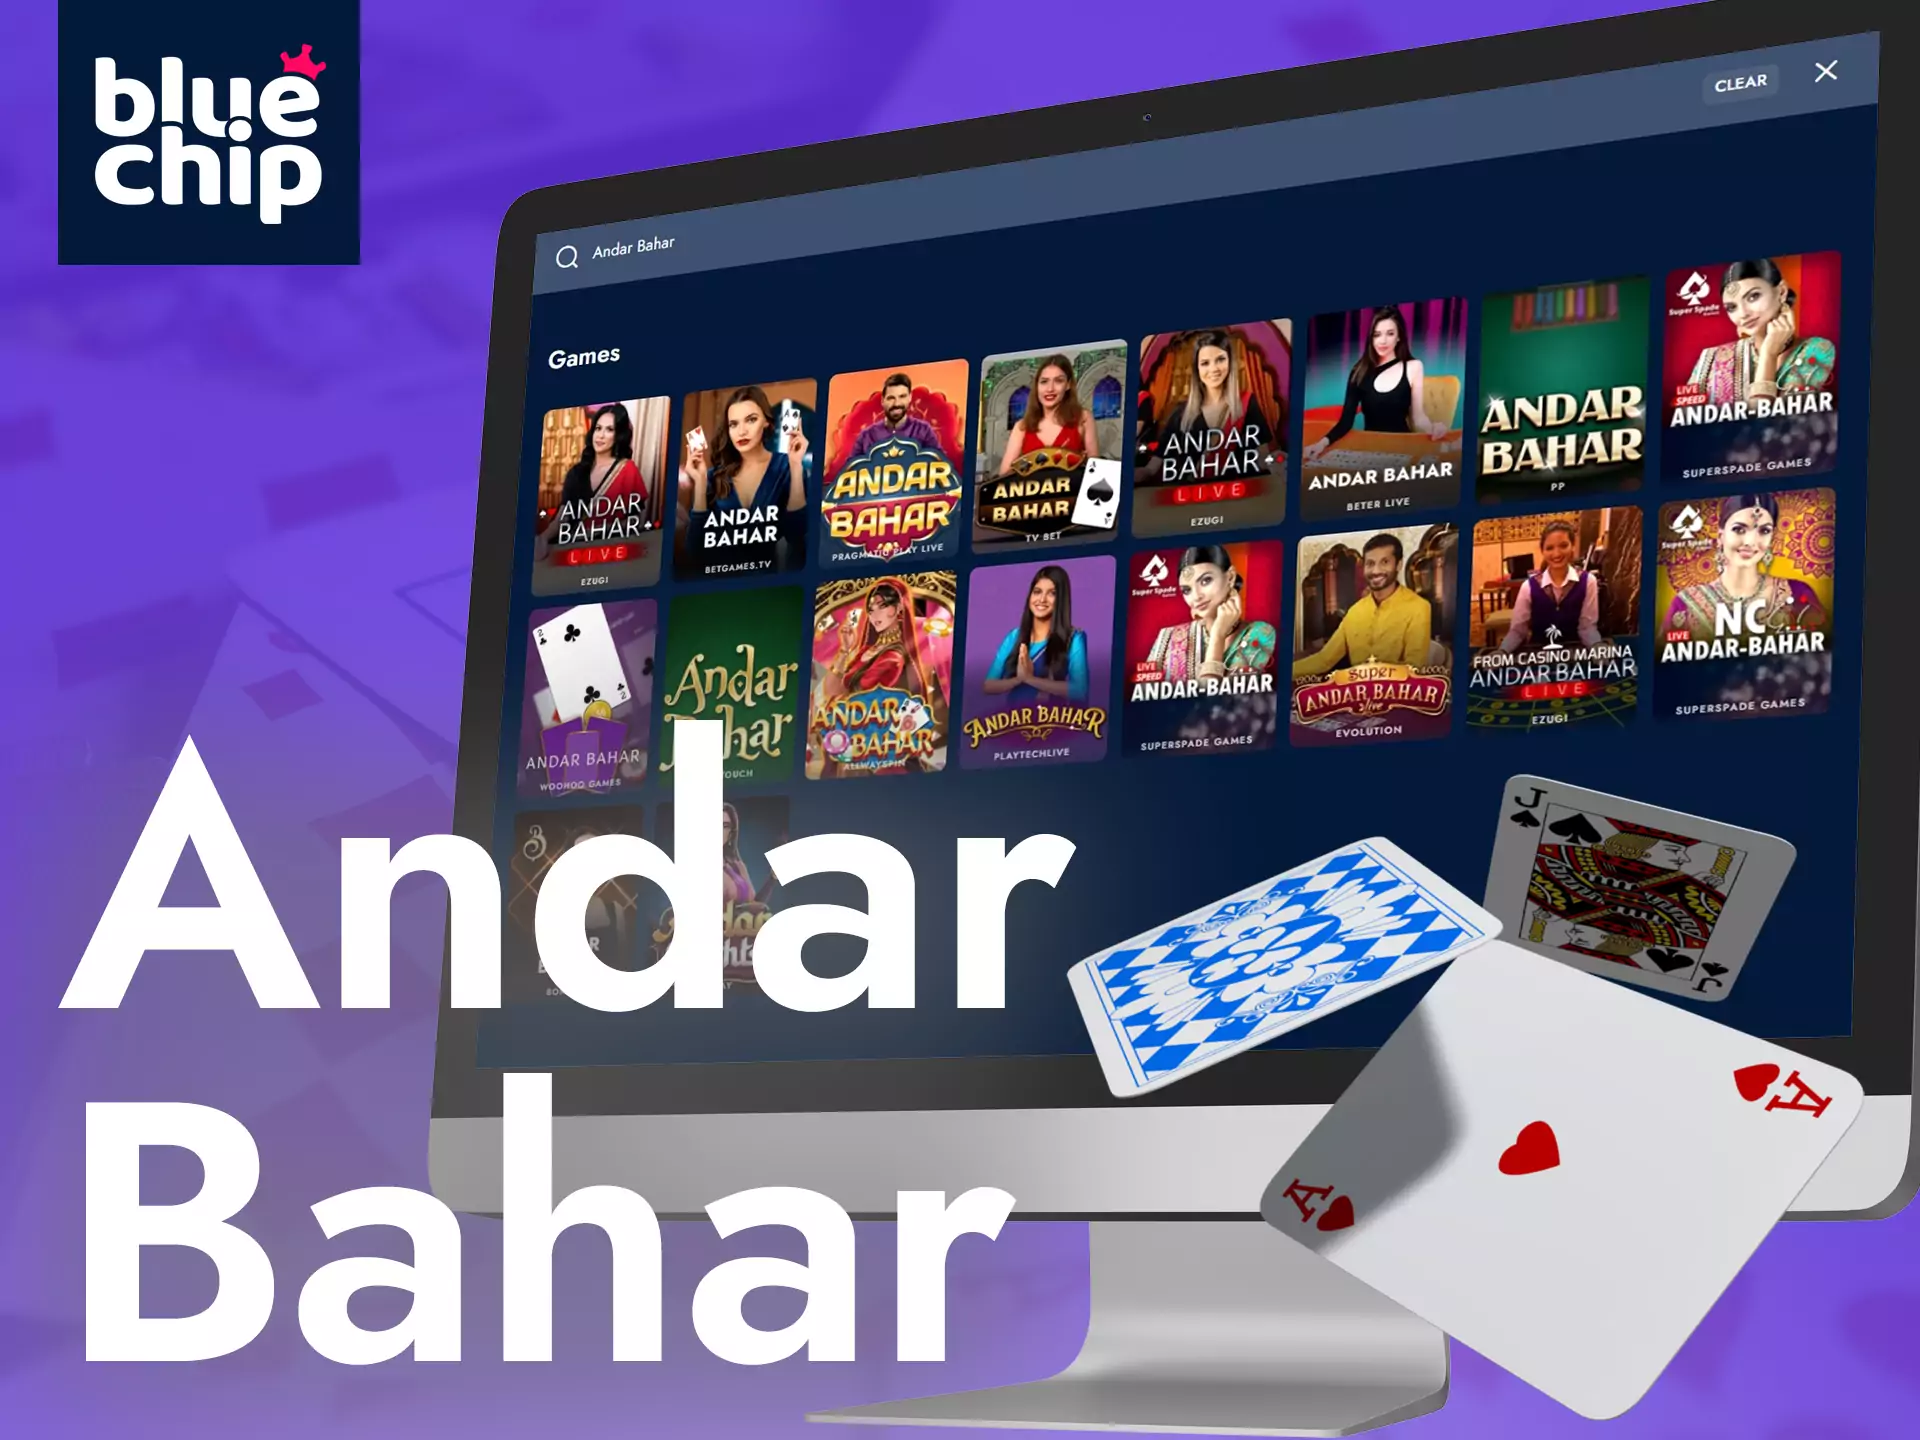 Andar Bahar is an online fortune game that is quite popular in the Bluechip Casino.